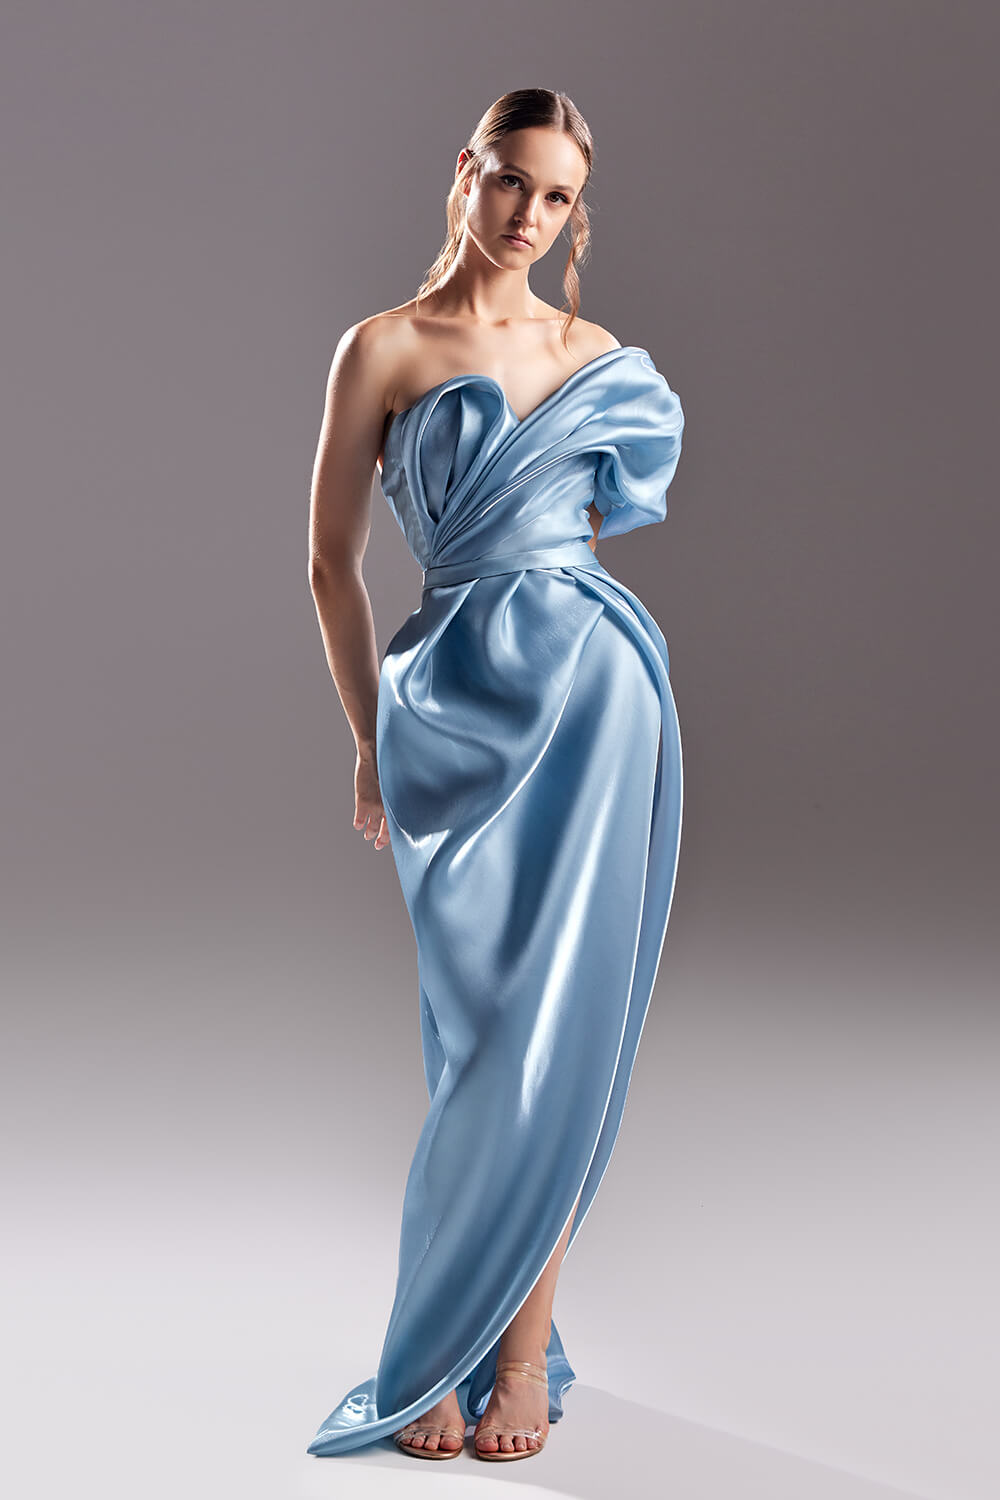 Satin gown by gaby charbachy